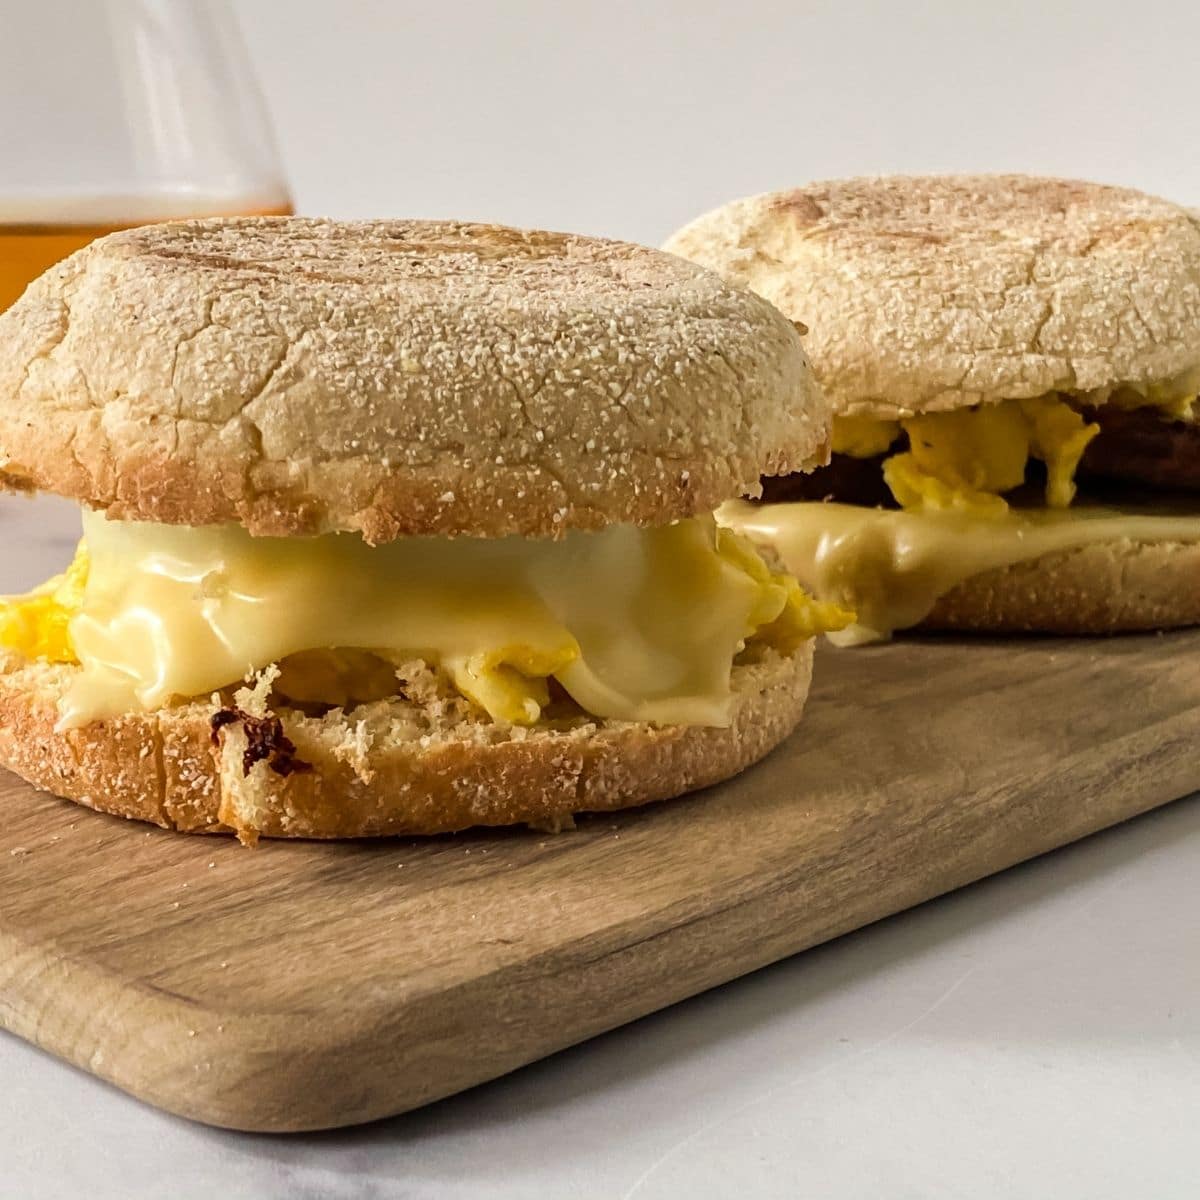 egg and sausage mcmuffin sandwiches on cutting board